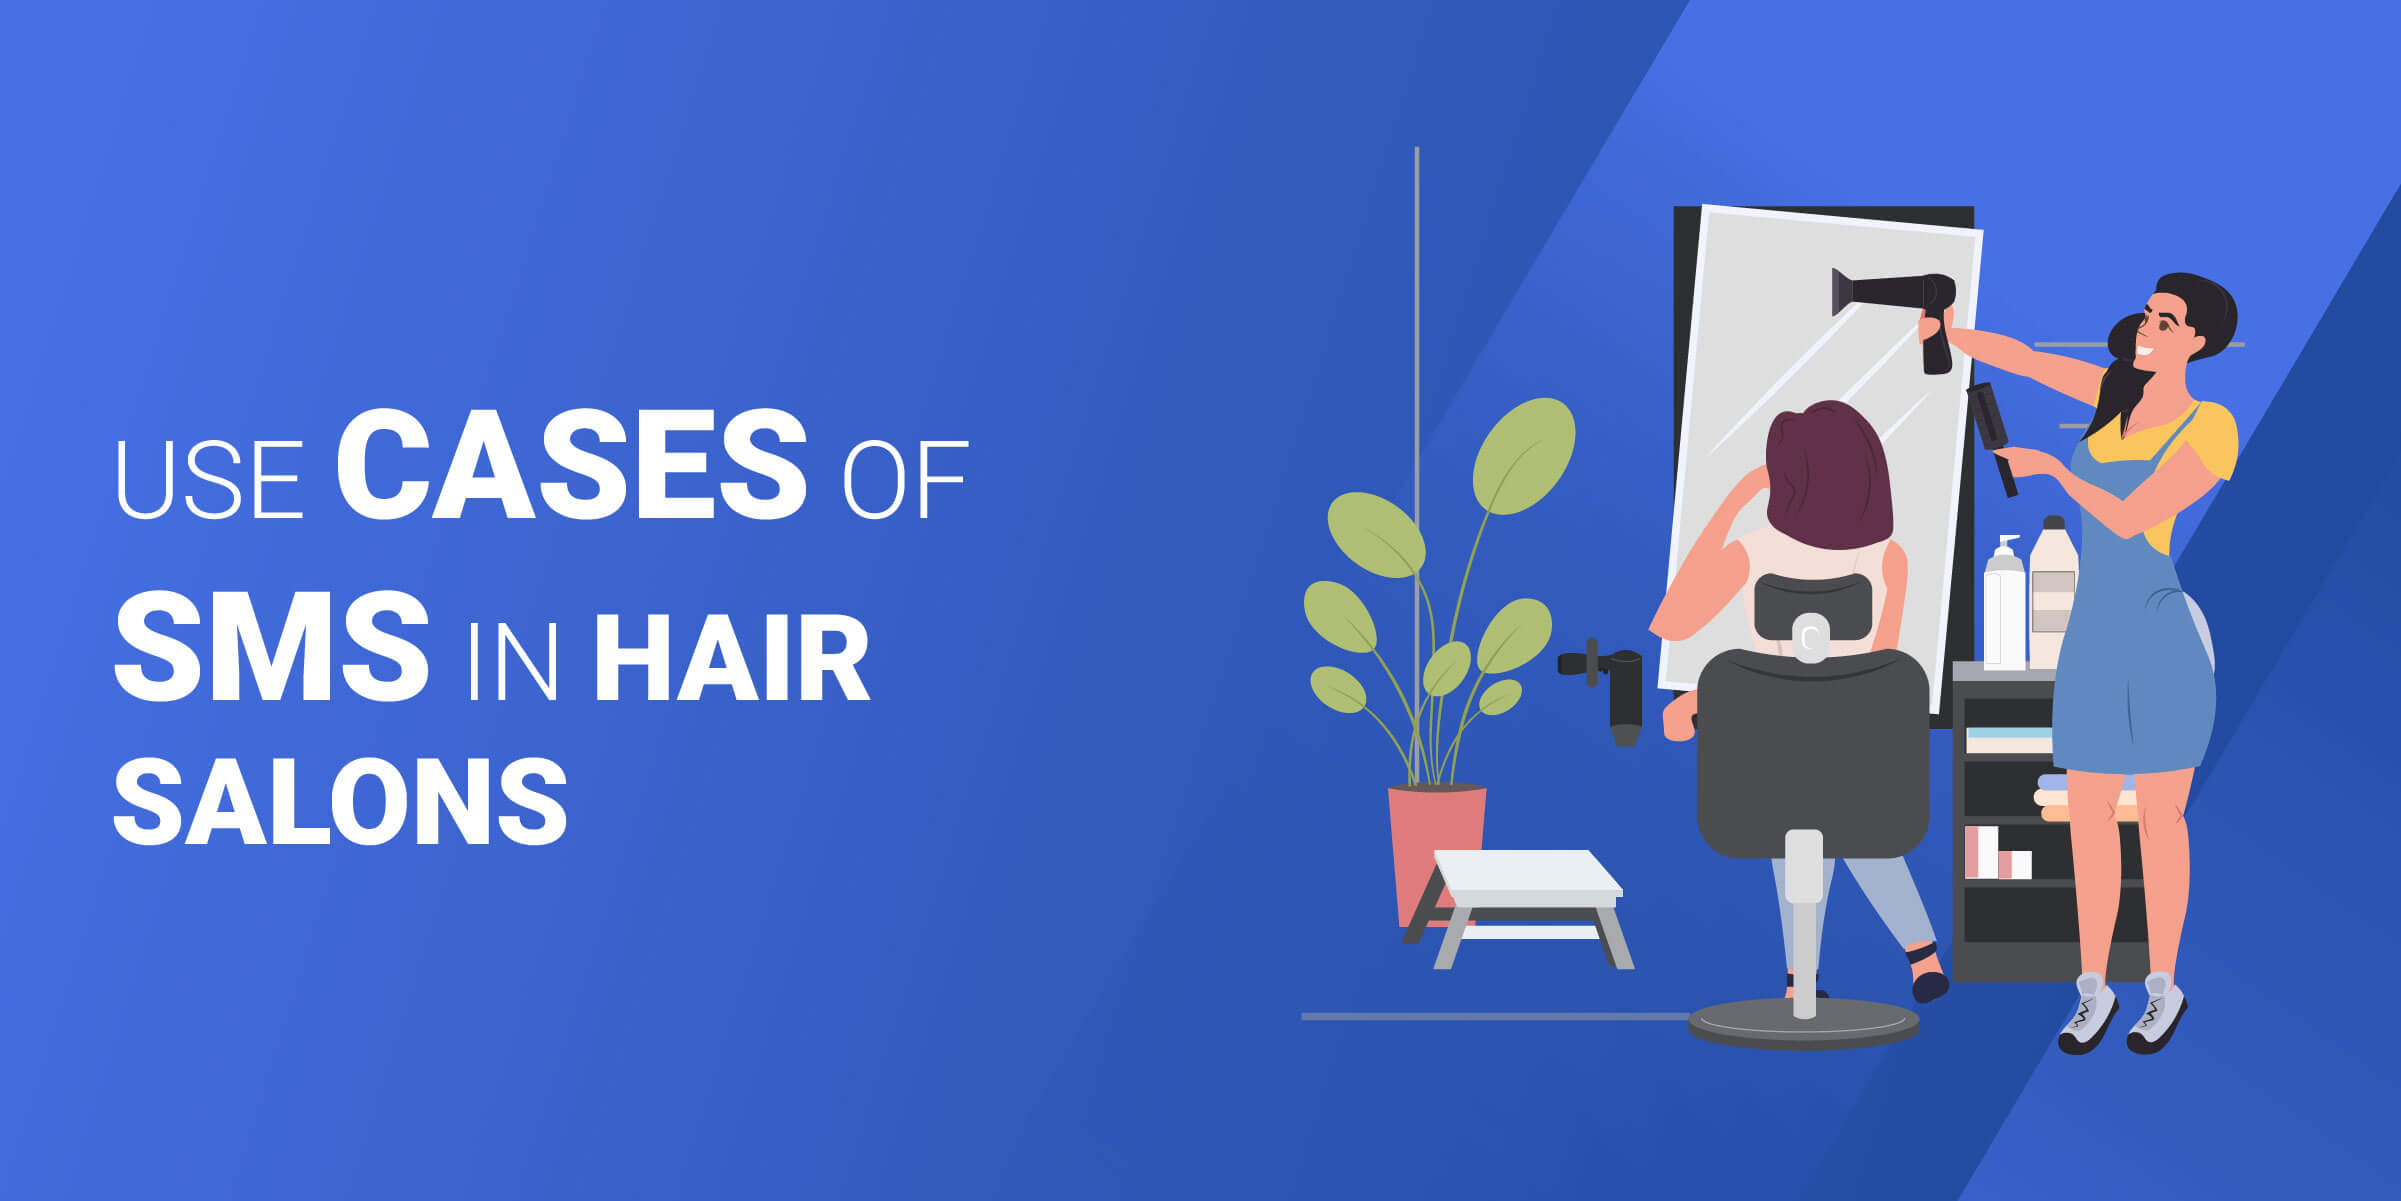 Use Cases of SMS in Hair Salons